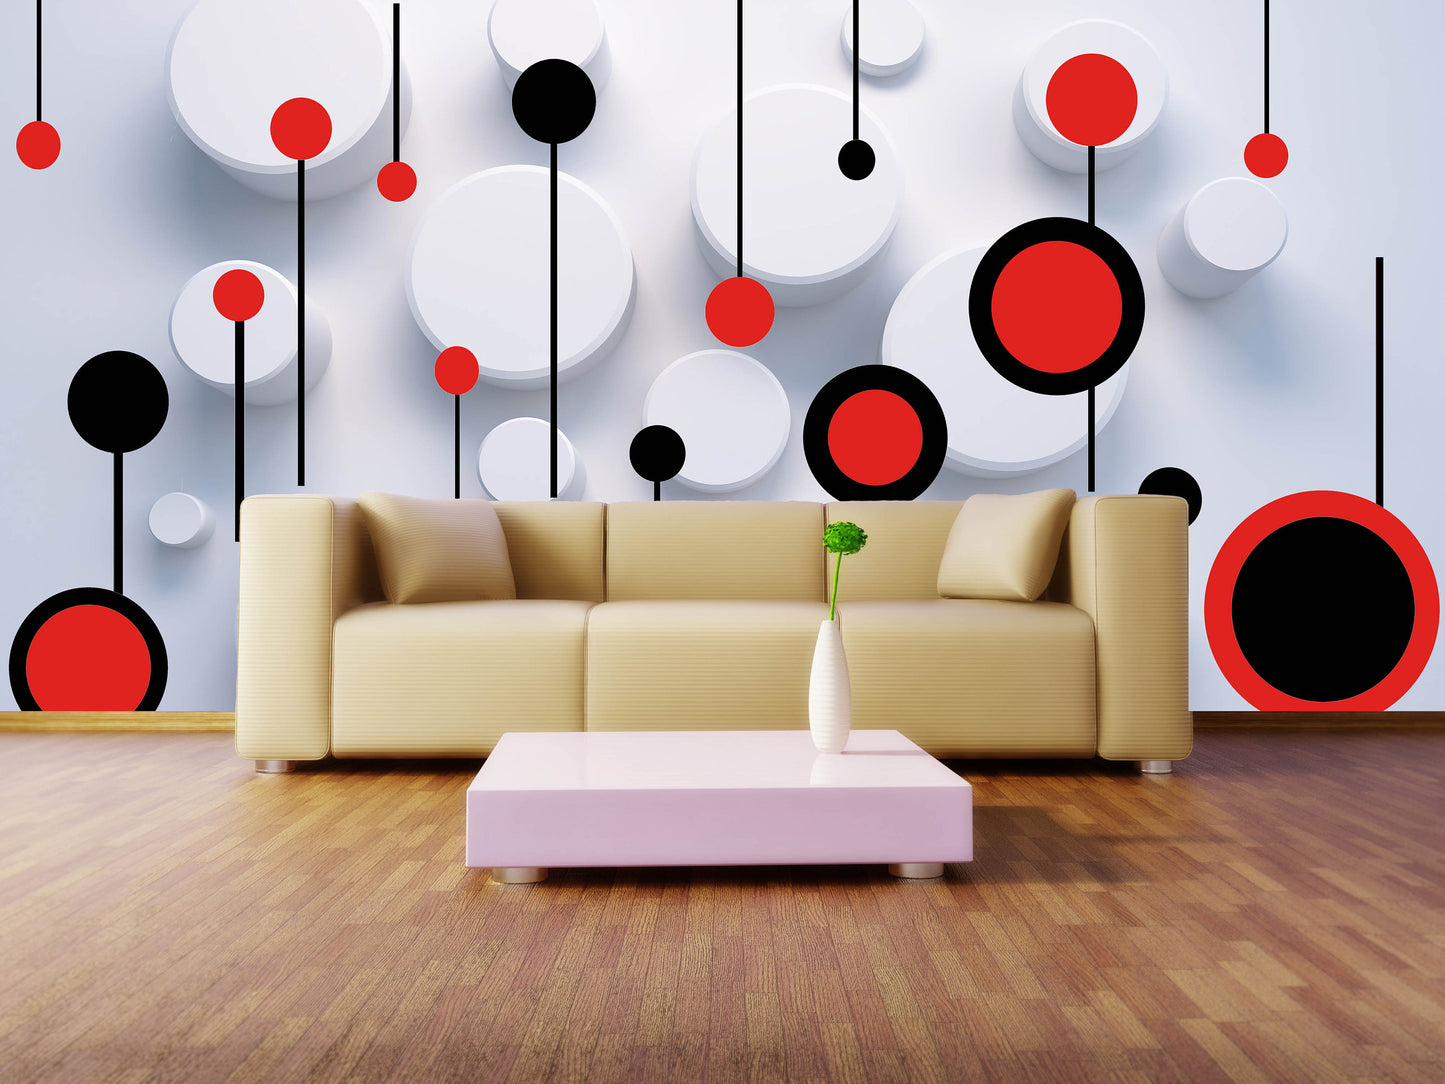 Abstract wallpaper Minimalist wall decor Peel and stick wallpaper Photo wallpaper Removable wallpaper art deco wallpaper Bedroom wall decor